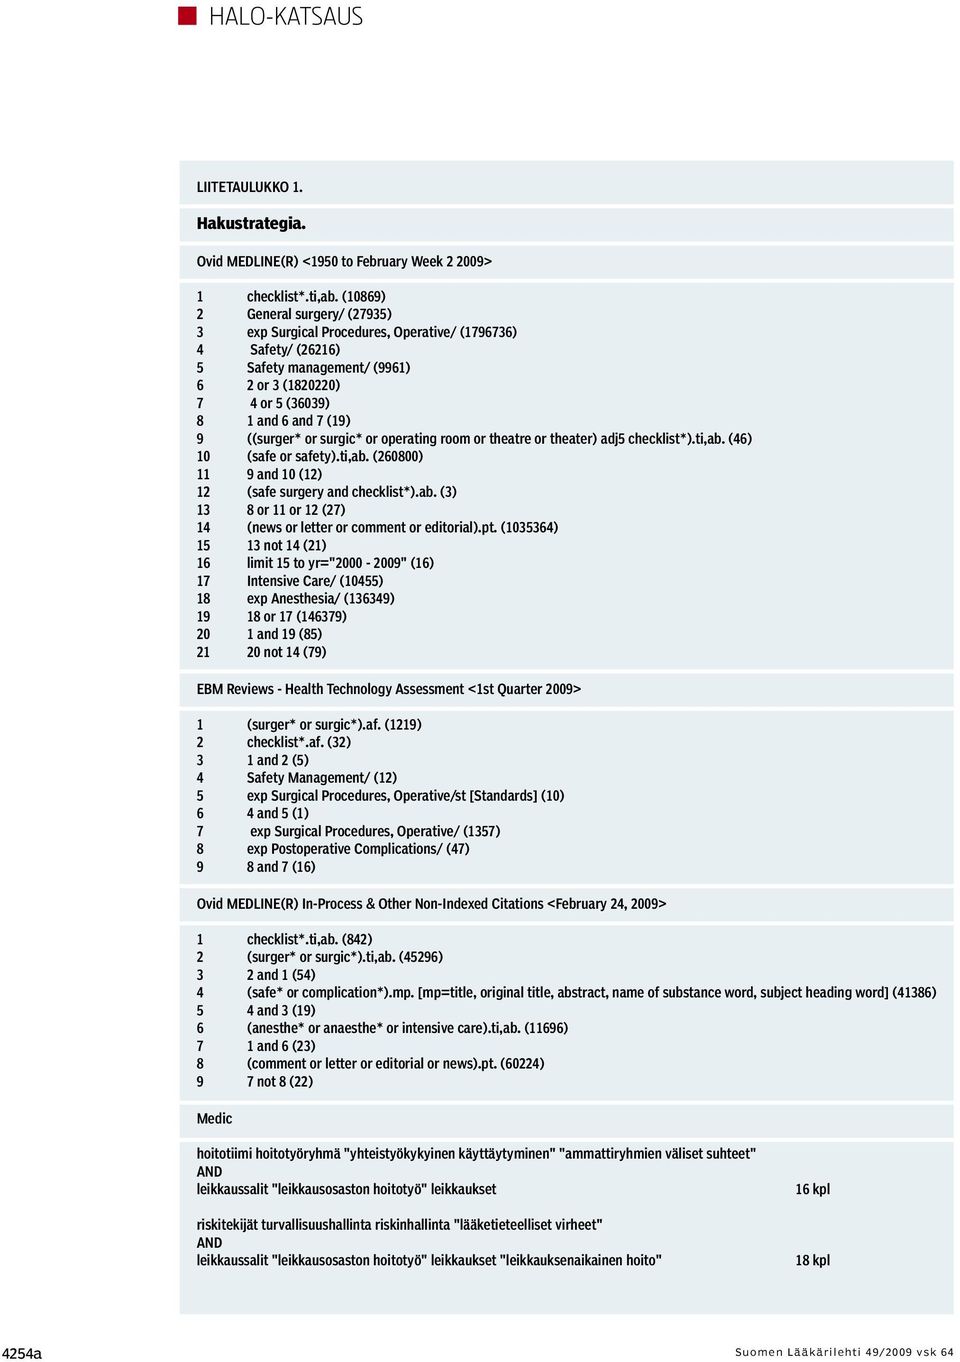 or surgic* or operating room or theatre or theater) adj5 checklist*).ti,ab. (46) 10 (safe or safety).ti,ab. (260800) 11 9 and 10 (12) 12 (safe surgery and checklist*).ab. (3) 13 8 or 11 or 12 (27) 14 (news or letter or comment or editorial).